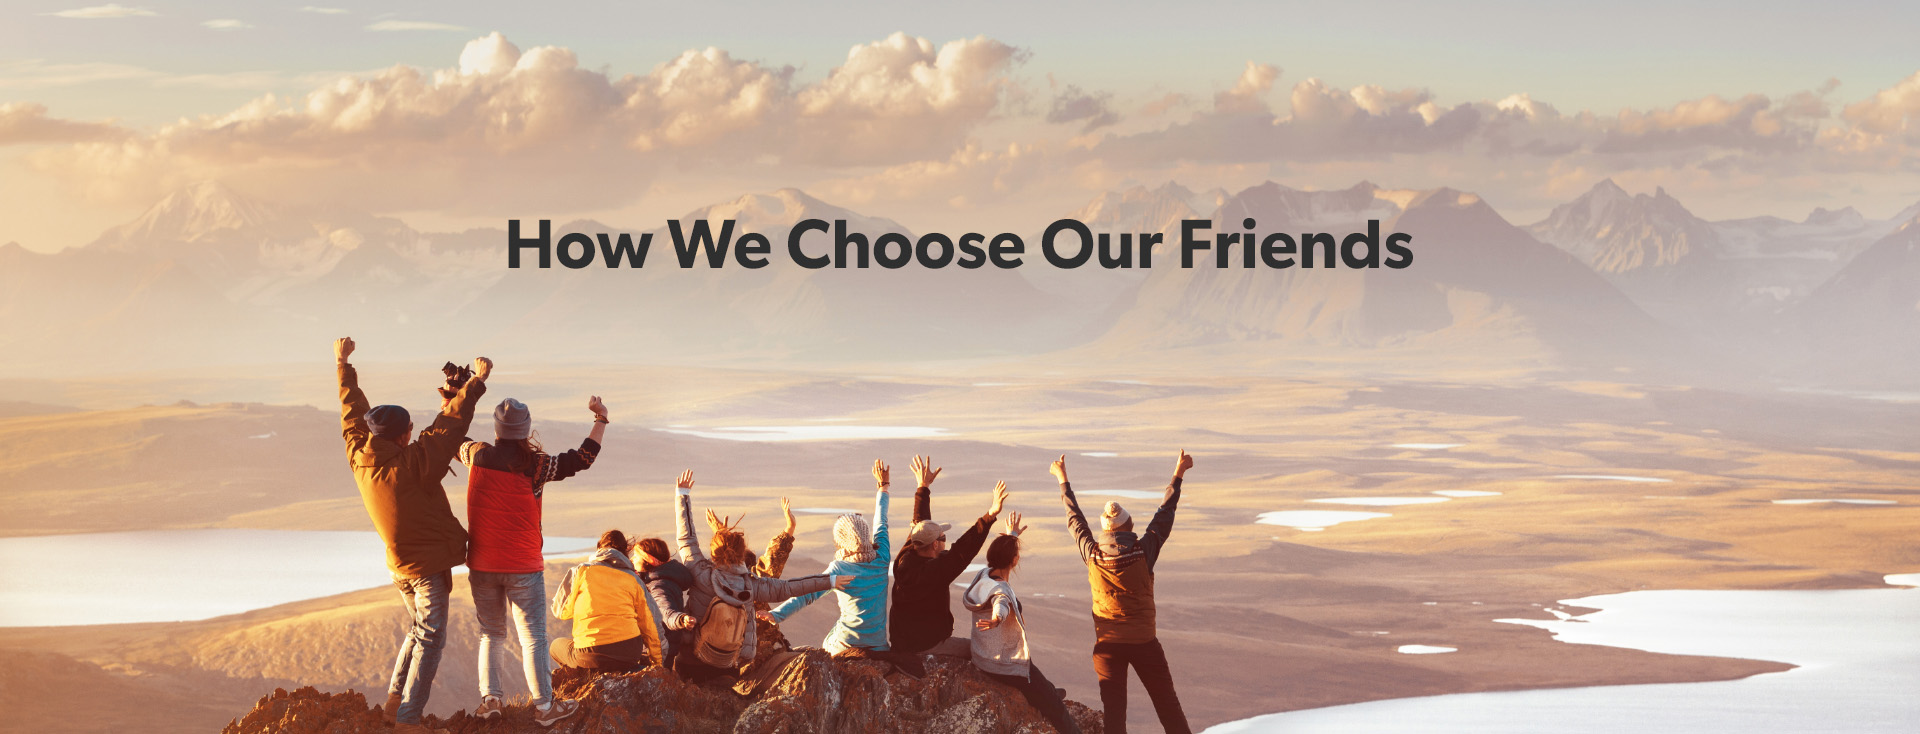 How We Choose Our Friends